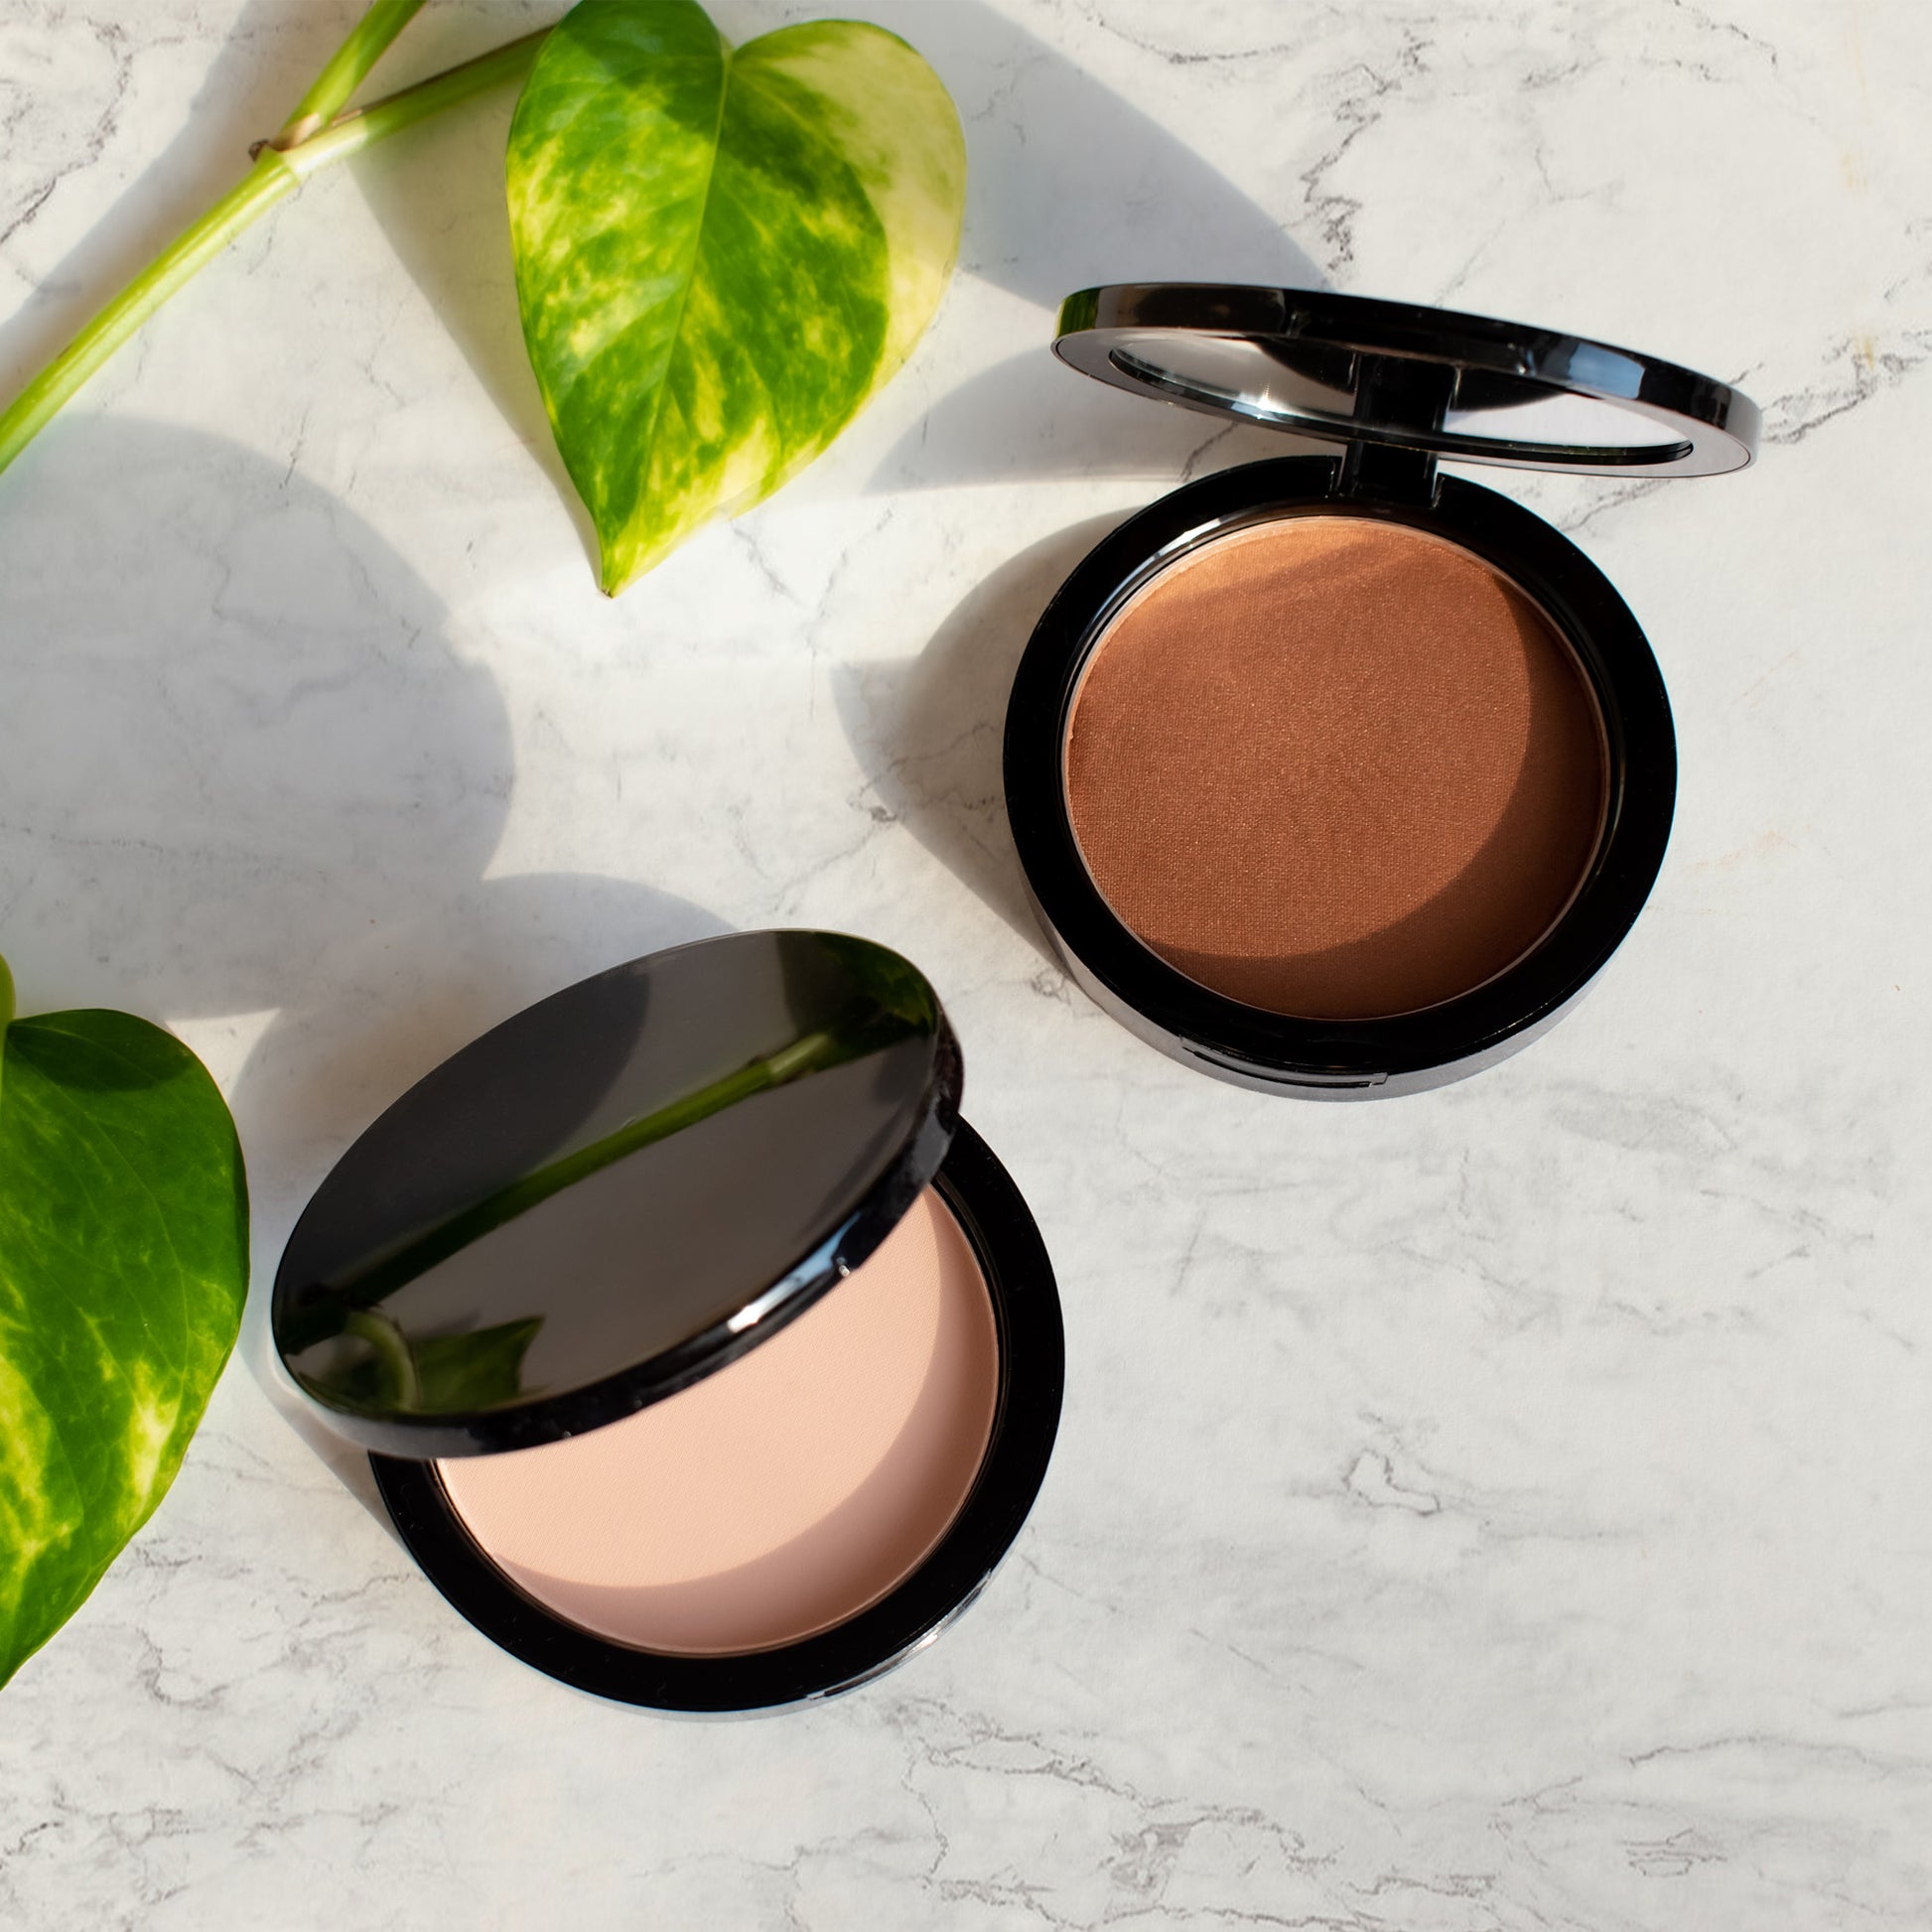 Get a natural, flawless-looking complexion with Cruisin Organics' Walnut Powder Foundation. This dual blend powder uses red oxide for a beautiful, long-lasting color. Safe for external use, but let's not eat it, okay?